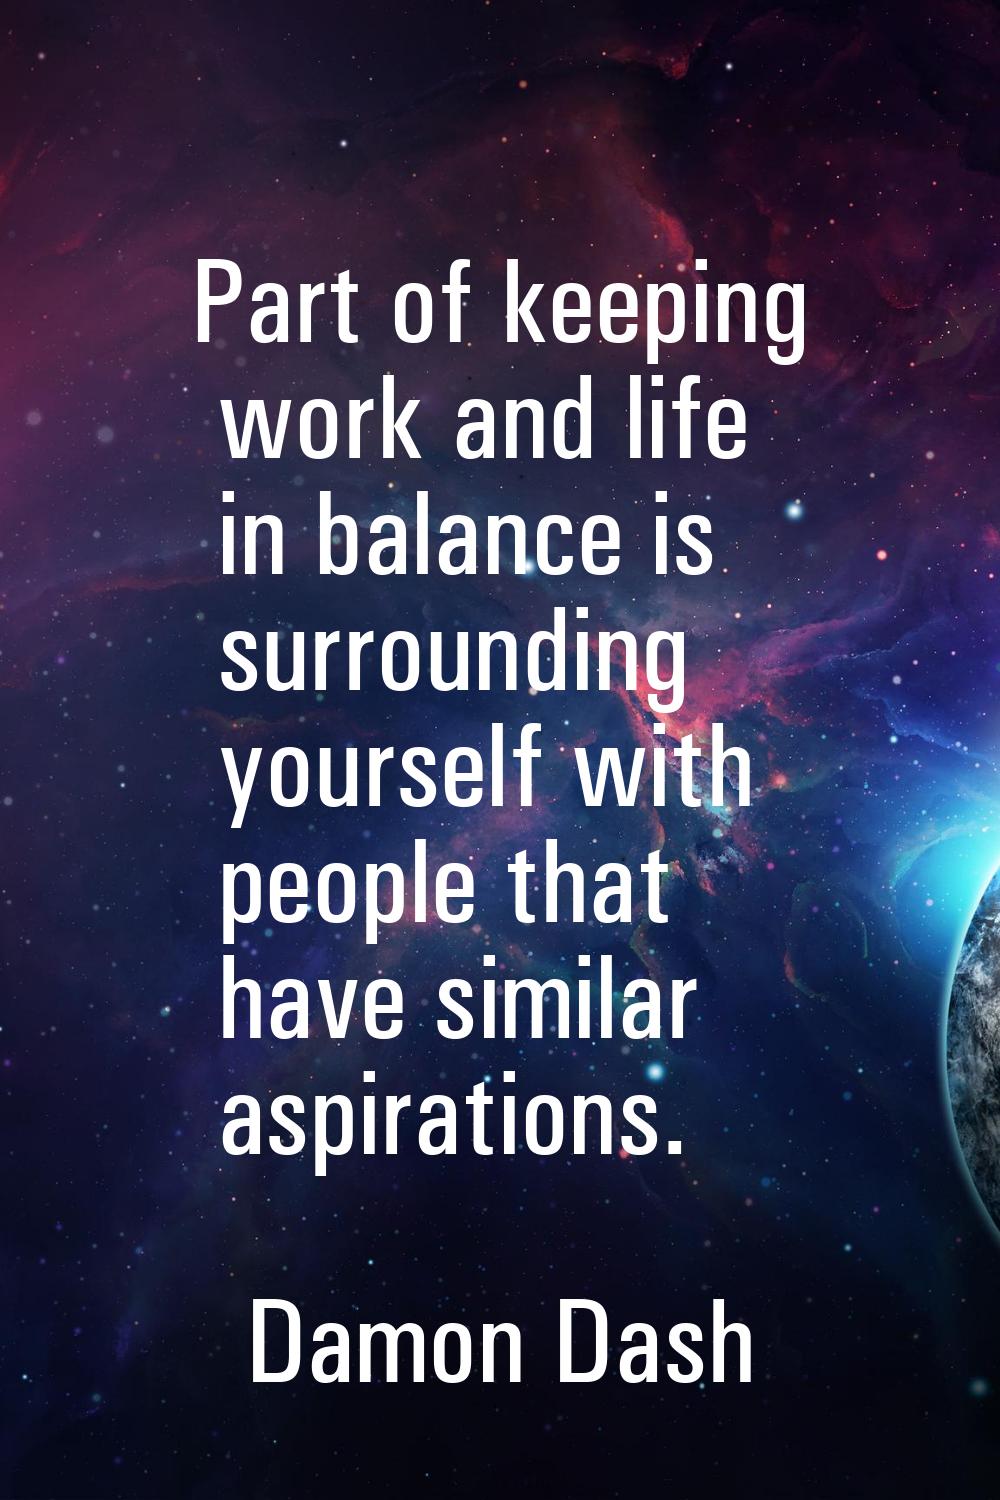 Part of keeping work and life in balance is surrounding yourself with people that have similar aspi